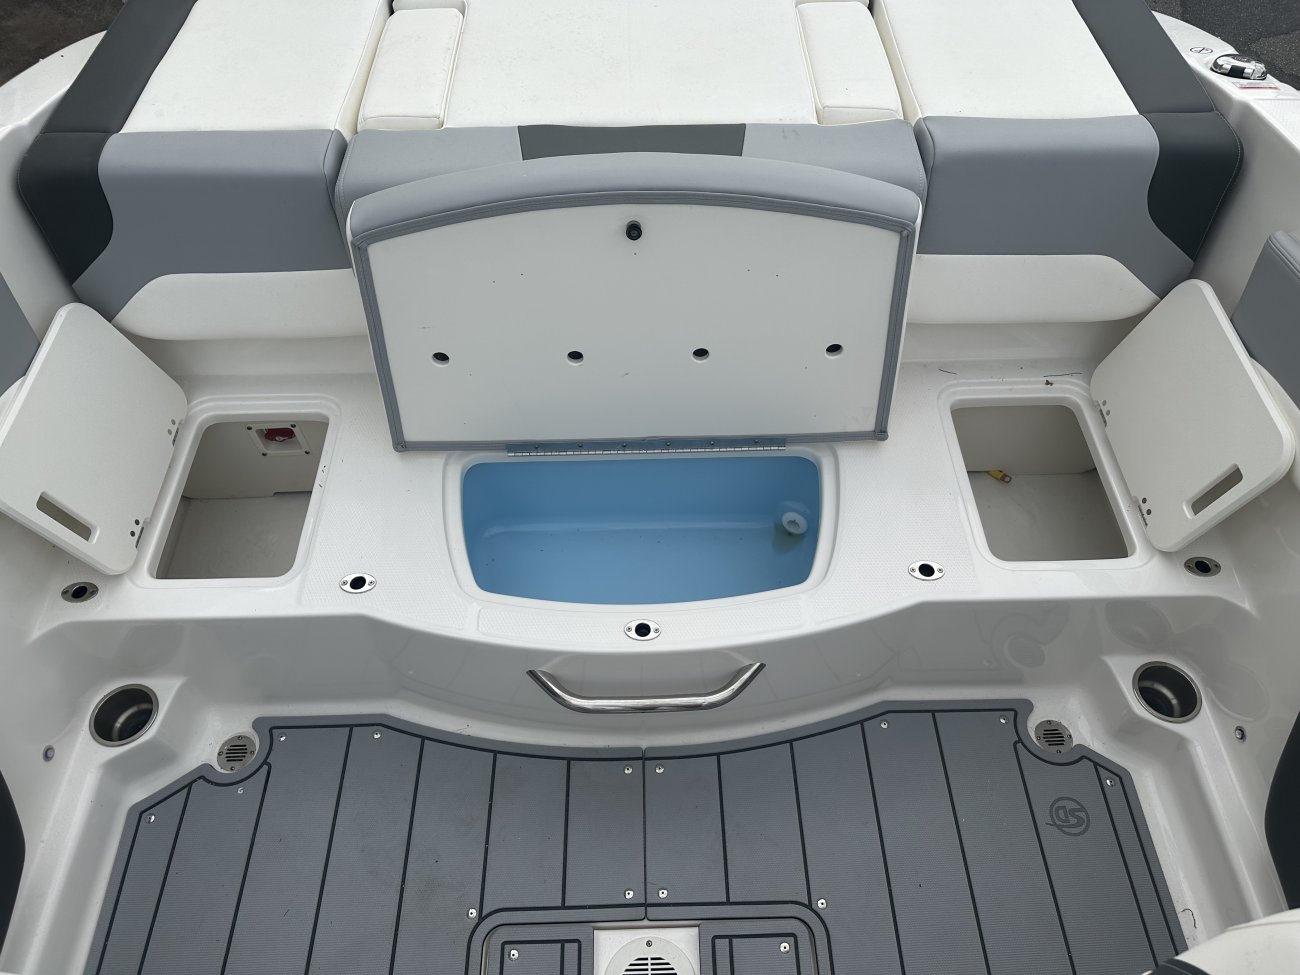 A dual console boat is typically one that was designed for salt water fishing and has the console split around a center walk thru to the bow.  The helm is usually starboard while there is passenger seating to port.